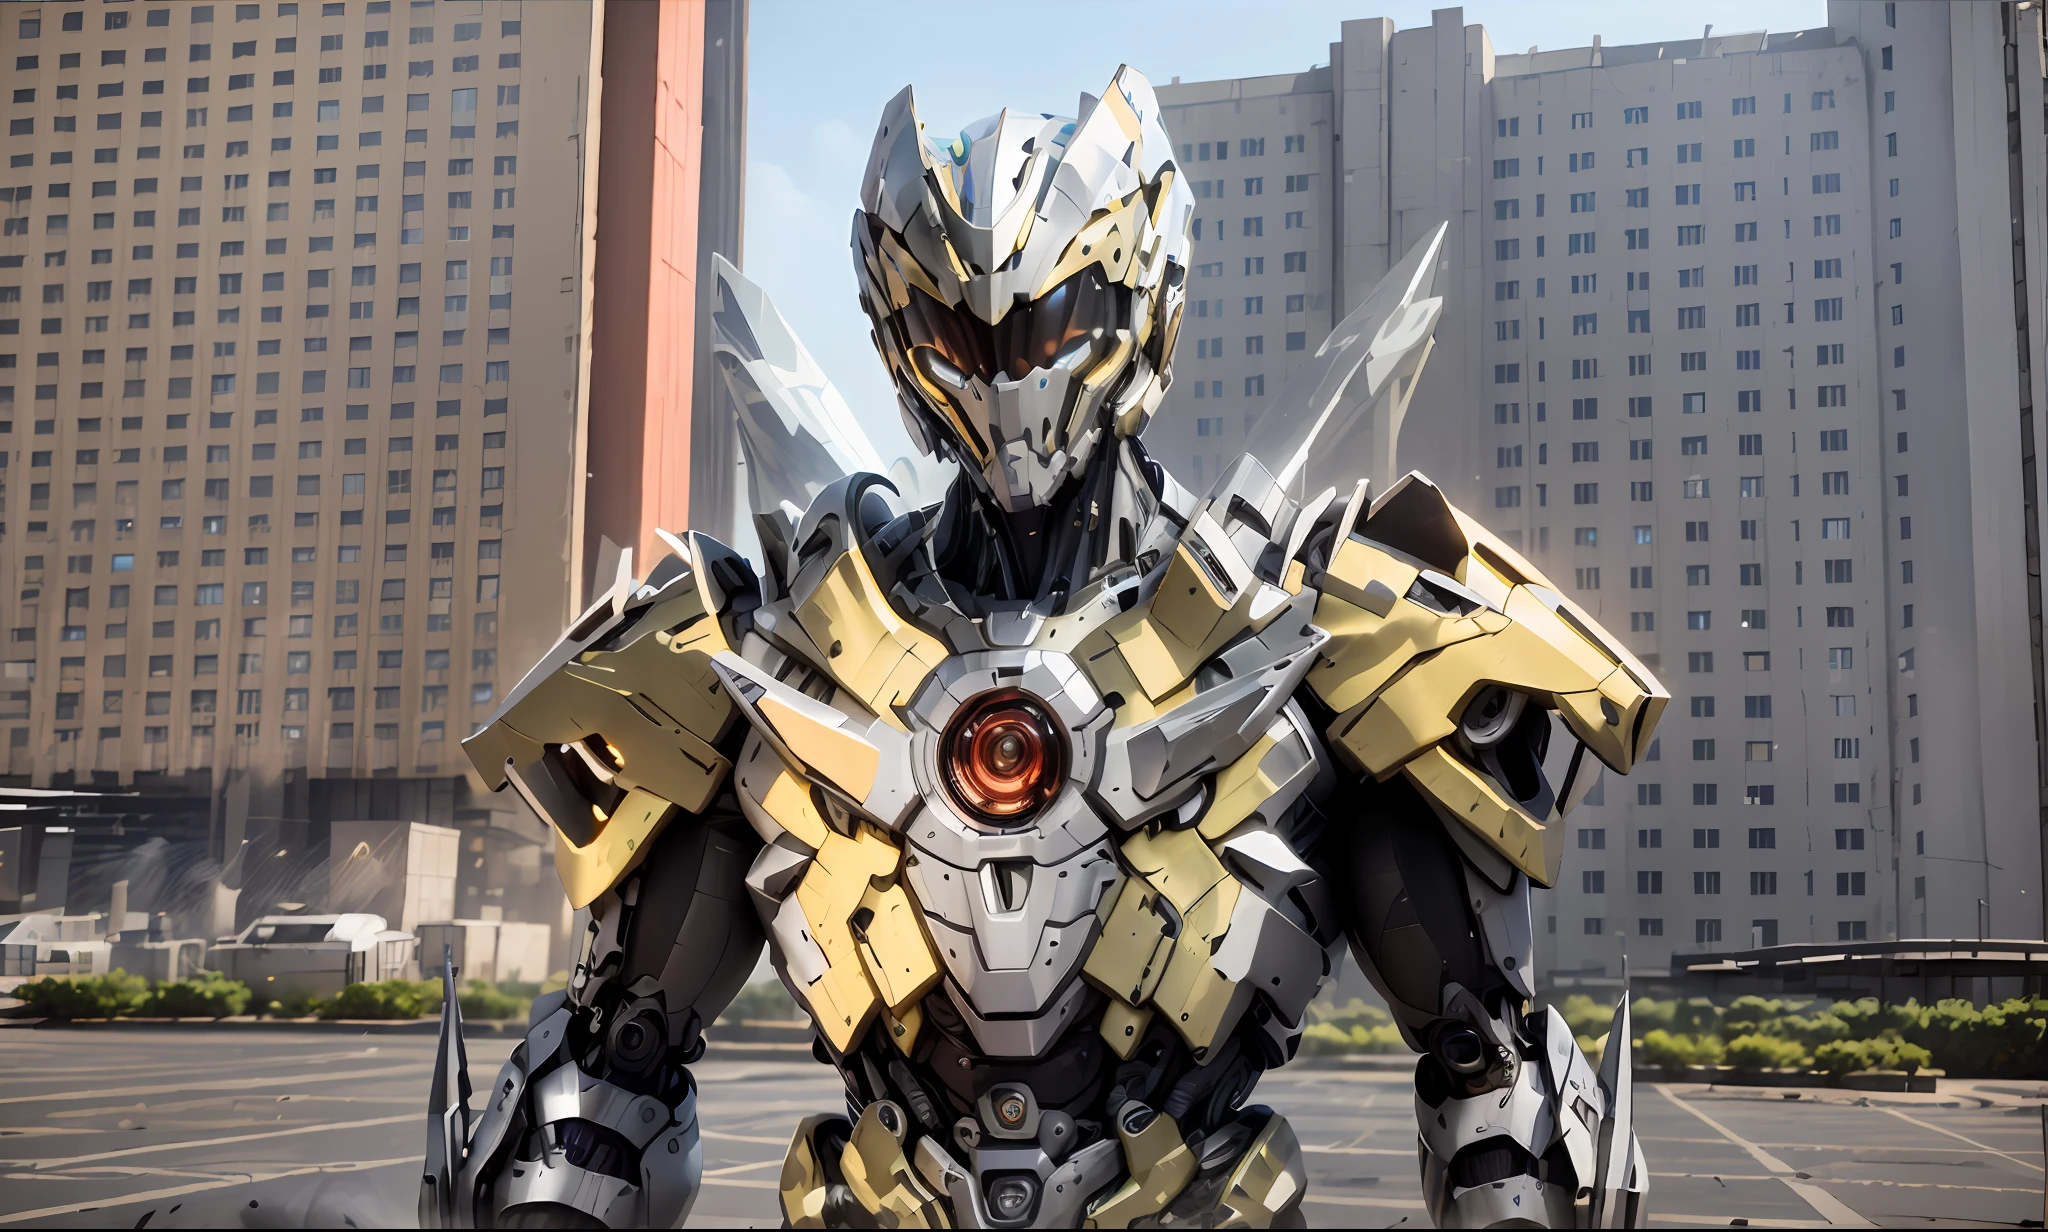 photorealestic，Machinary，mechs，Technologie，musculous，glowing light eyes，Burly body，style of photography，Real scenery（Metallic texture 1.8）（Excess detail 2）（High resolution1.K clarity1.9)（Carbon fiber 1.5）（Metal reflection 1.5）